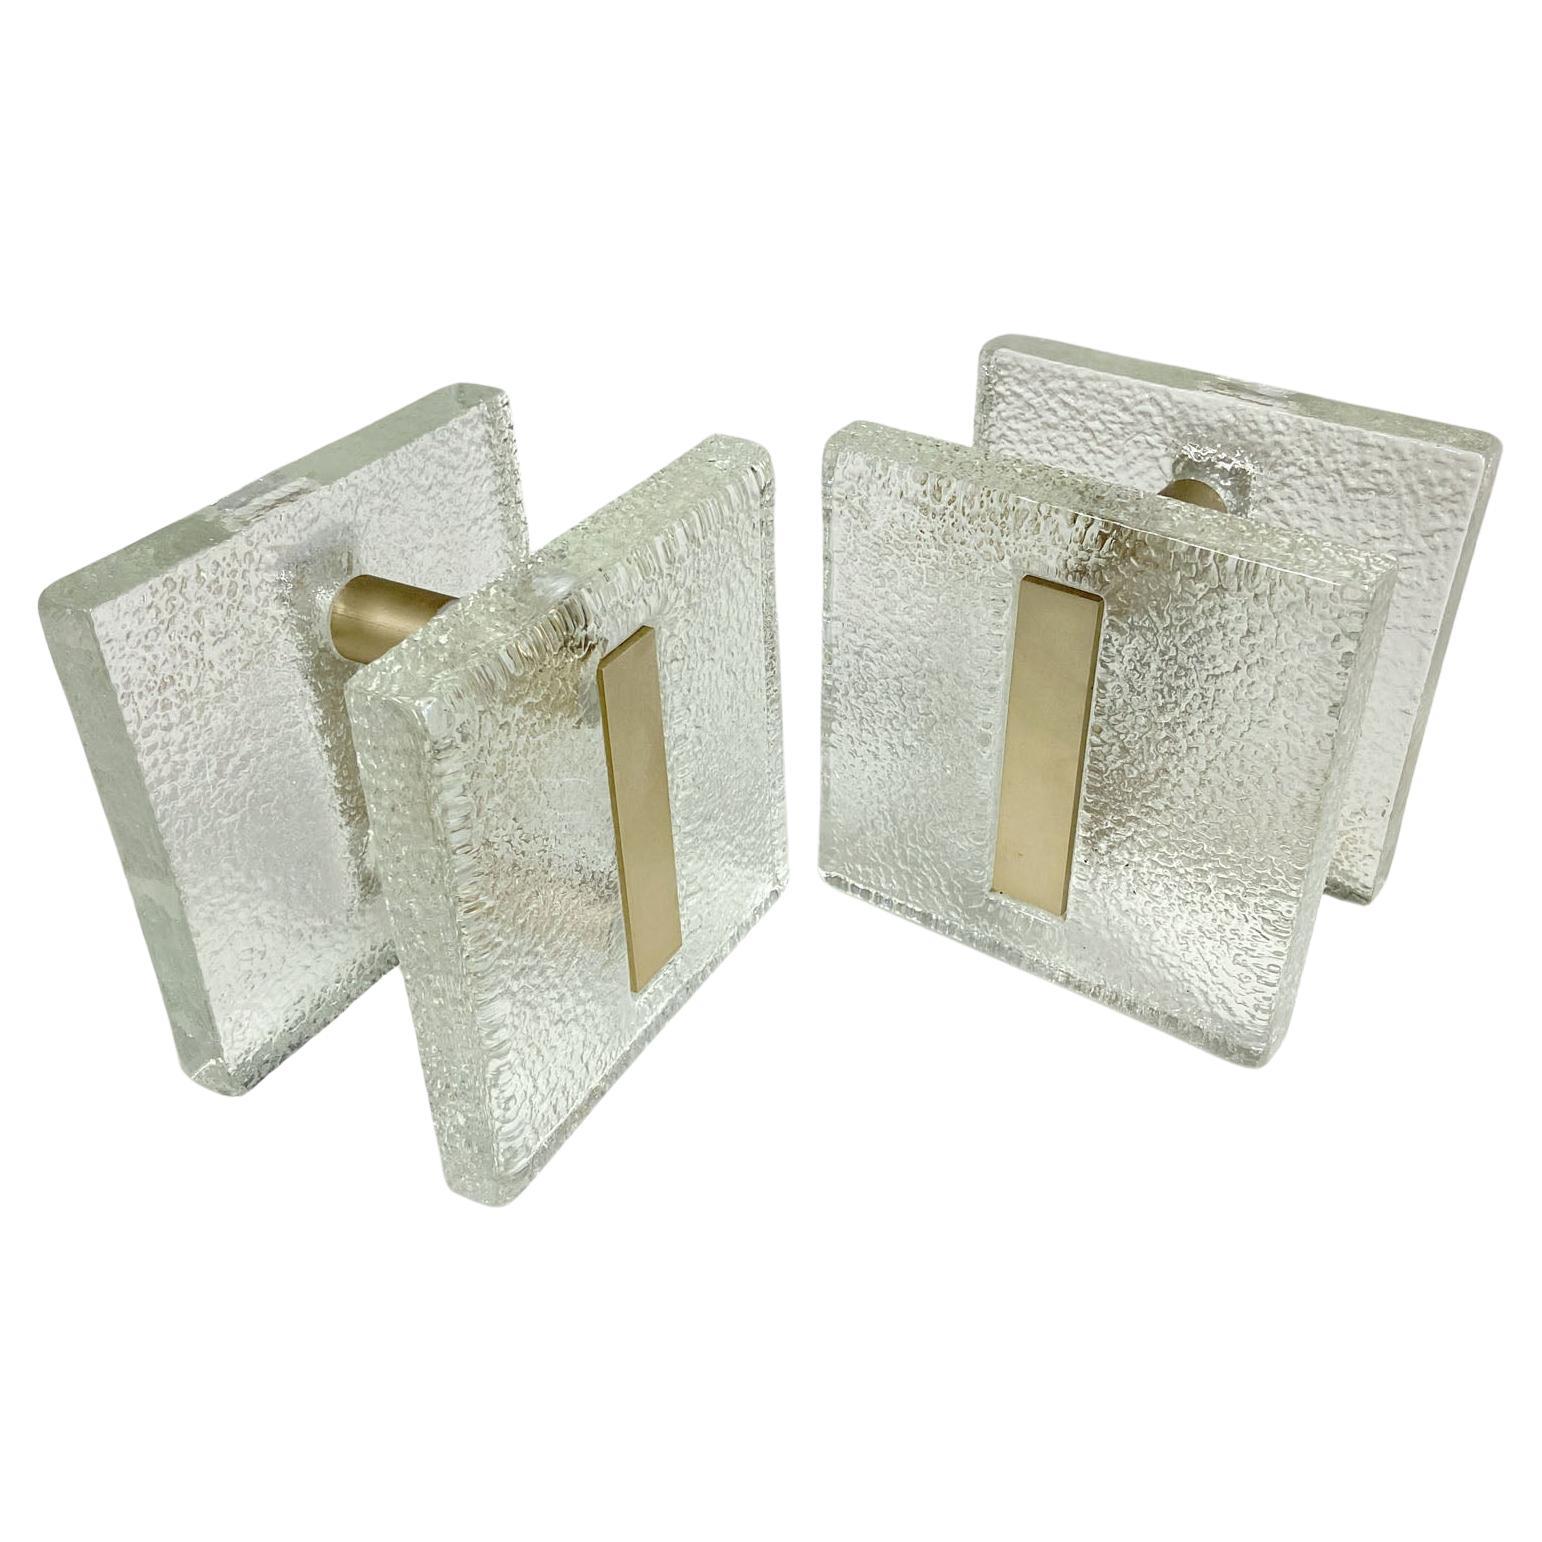 A pair of double door handles, push and pull, square textured clear cast glass with mat antique gold anodised aluminum. They are designed for a glass or wooden doors but suitable for any kind of doors. The glass slabs are cast by directing molten